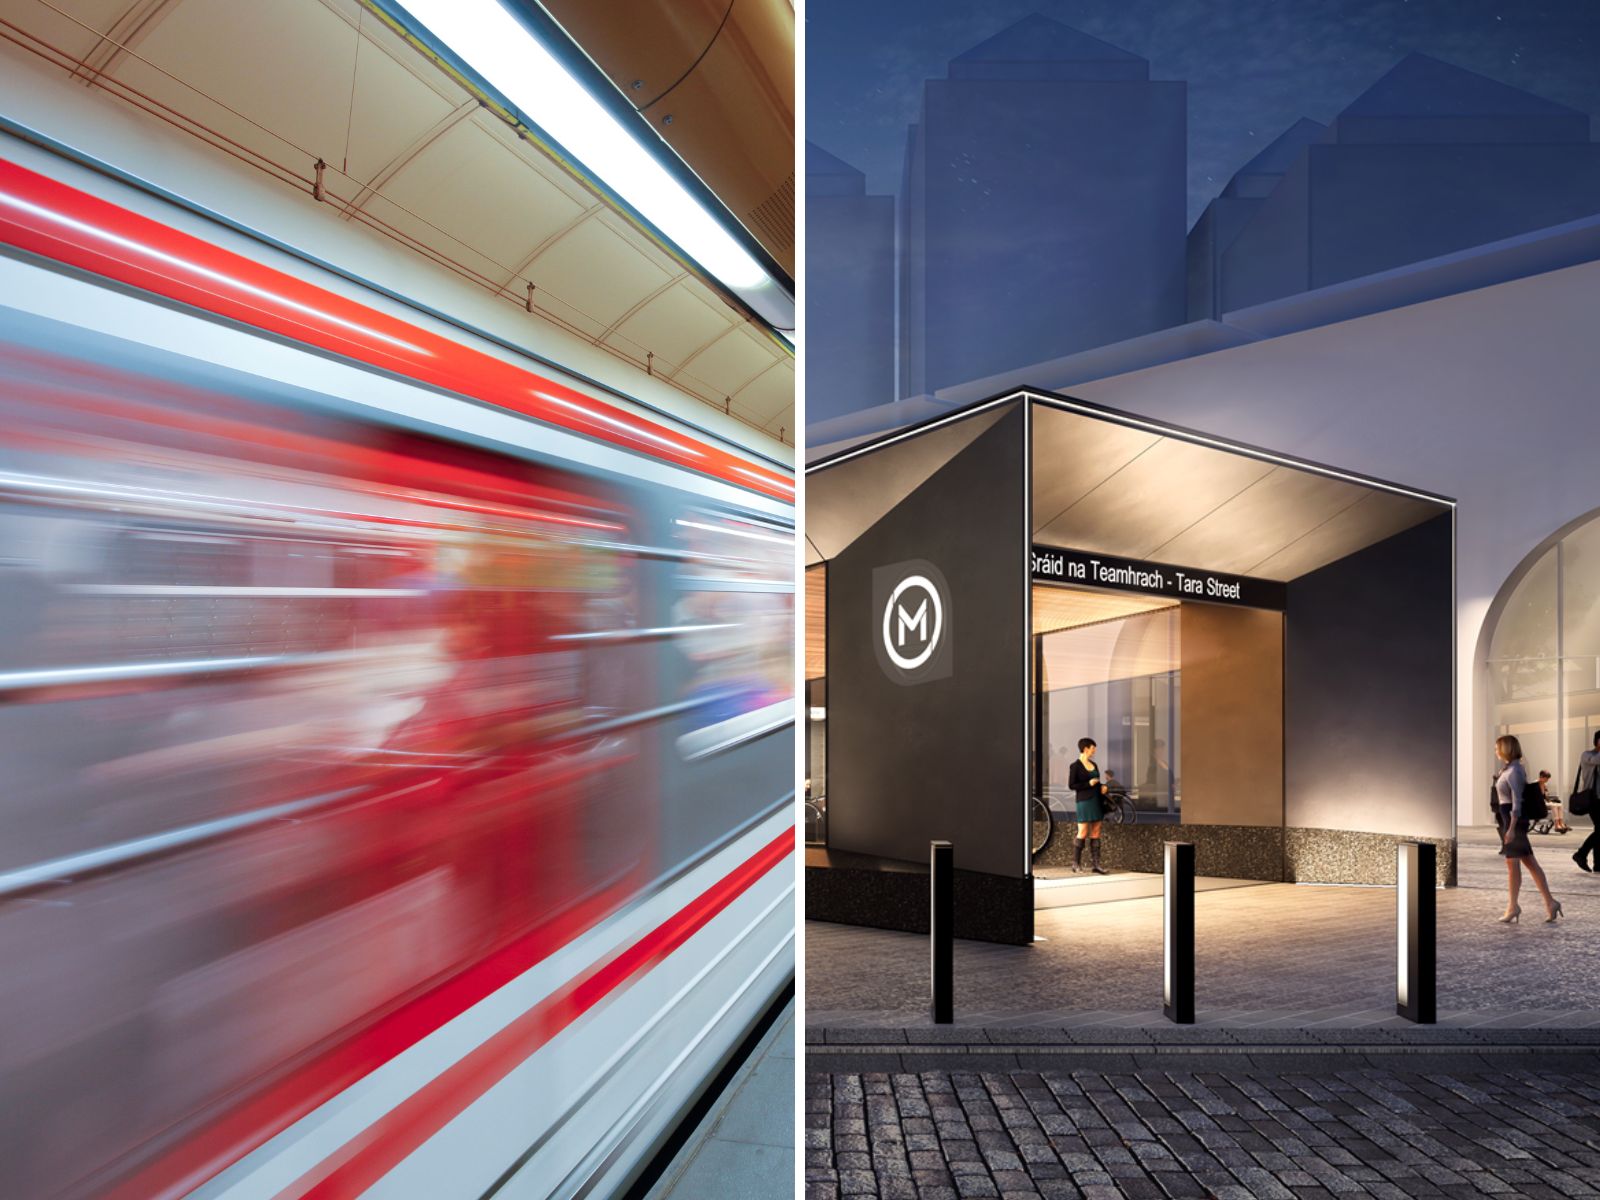 Split-screen image shows an underground Metro train and an artist's impression of a MetroLink station in Dublin